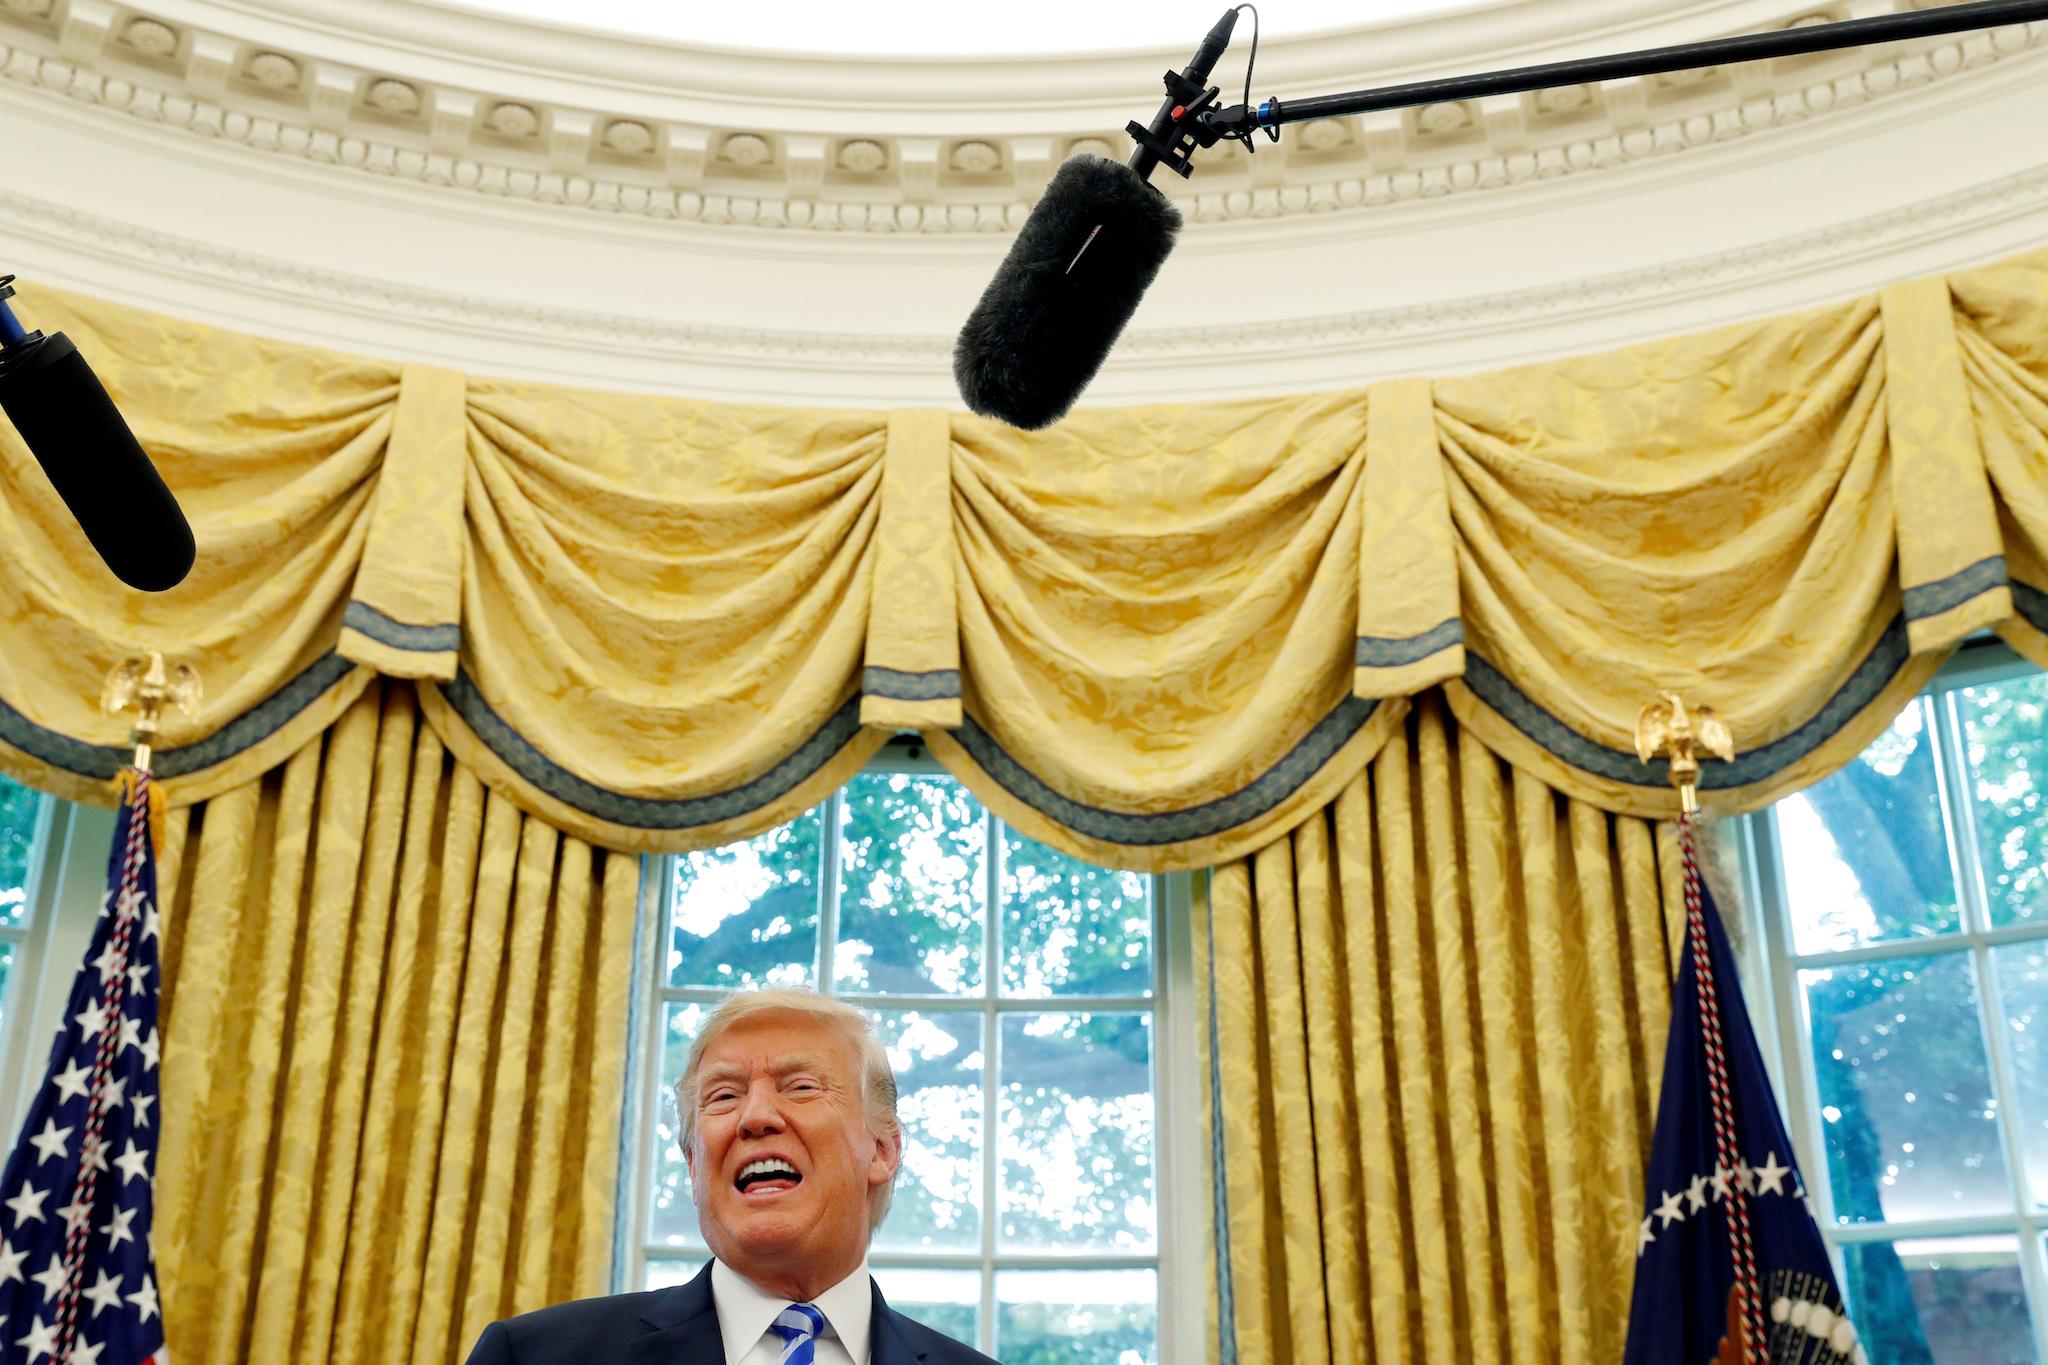 U.S. President Donald Trump answers questions from the news media after meeting with the President of FIFA Gianni Infantino in the Oval Office at the White House in Washington